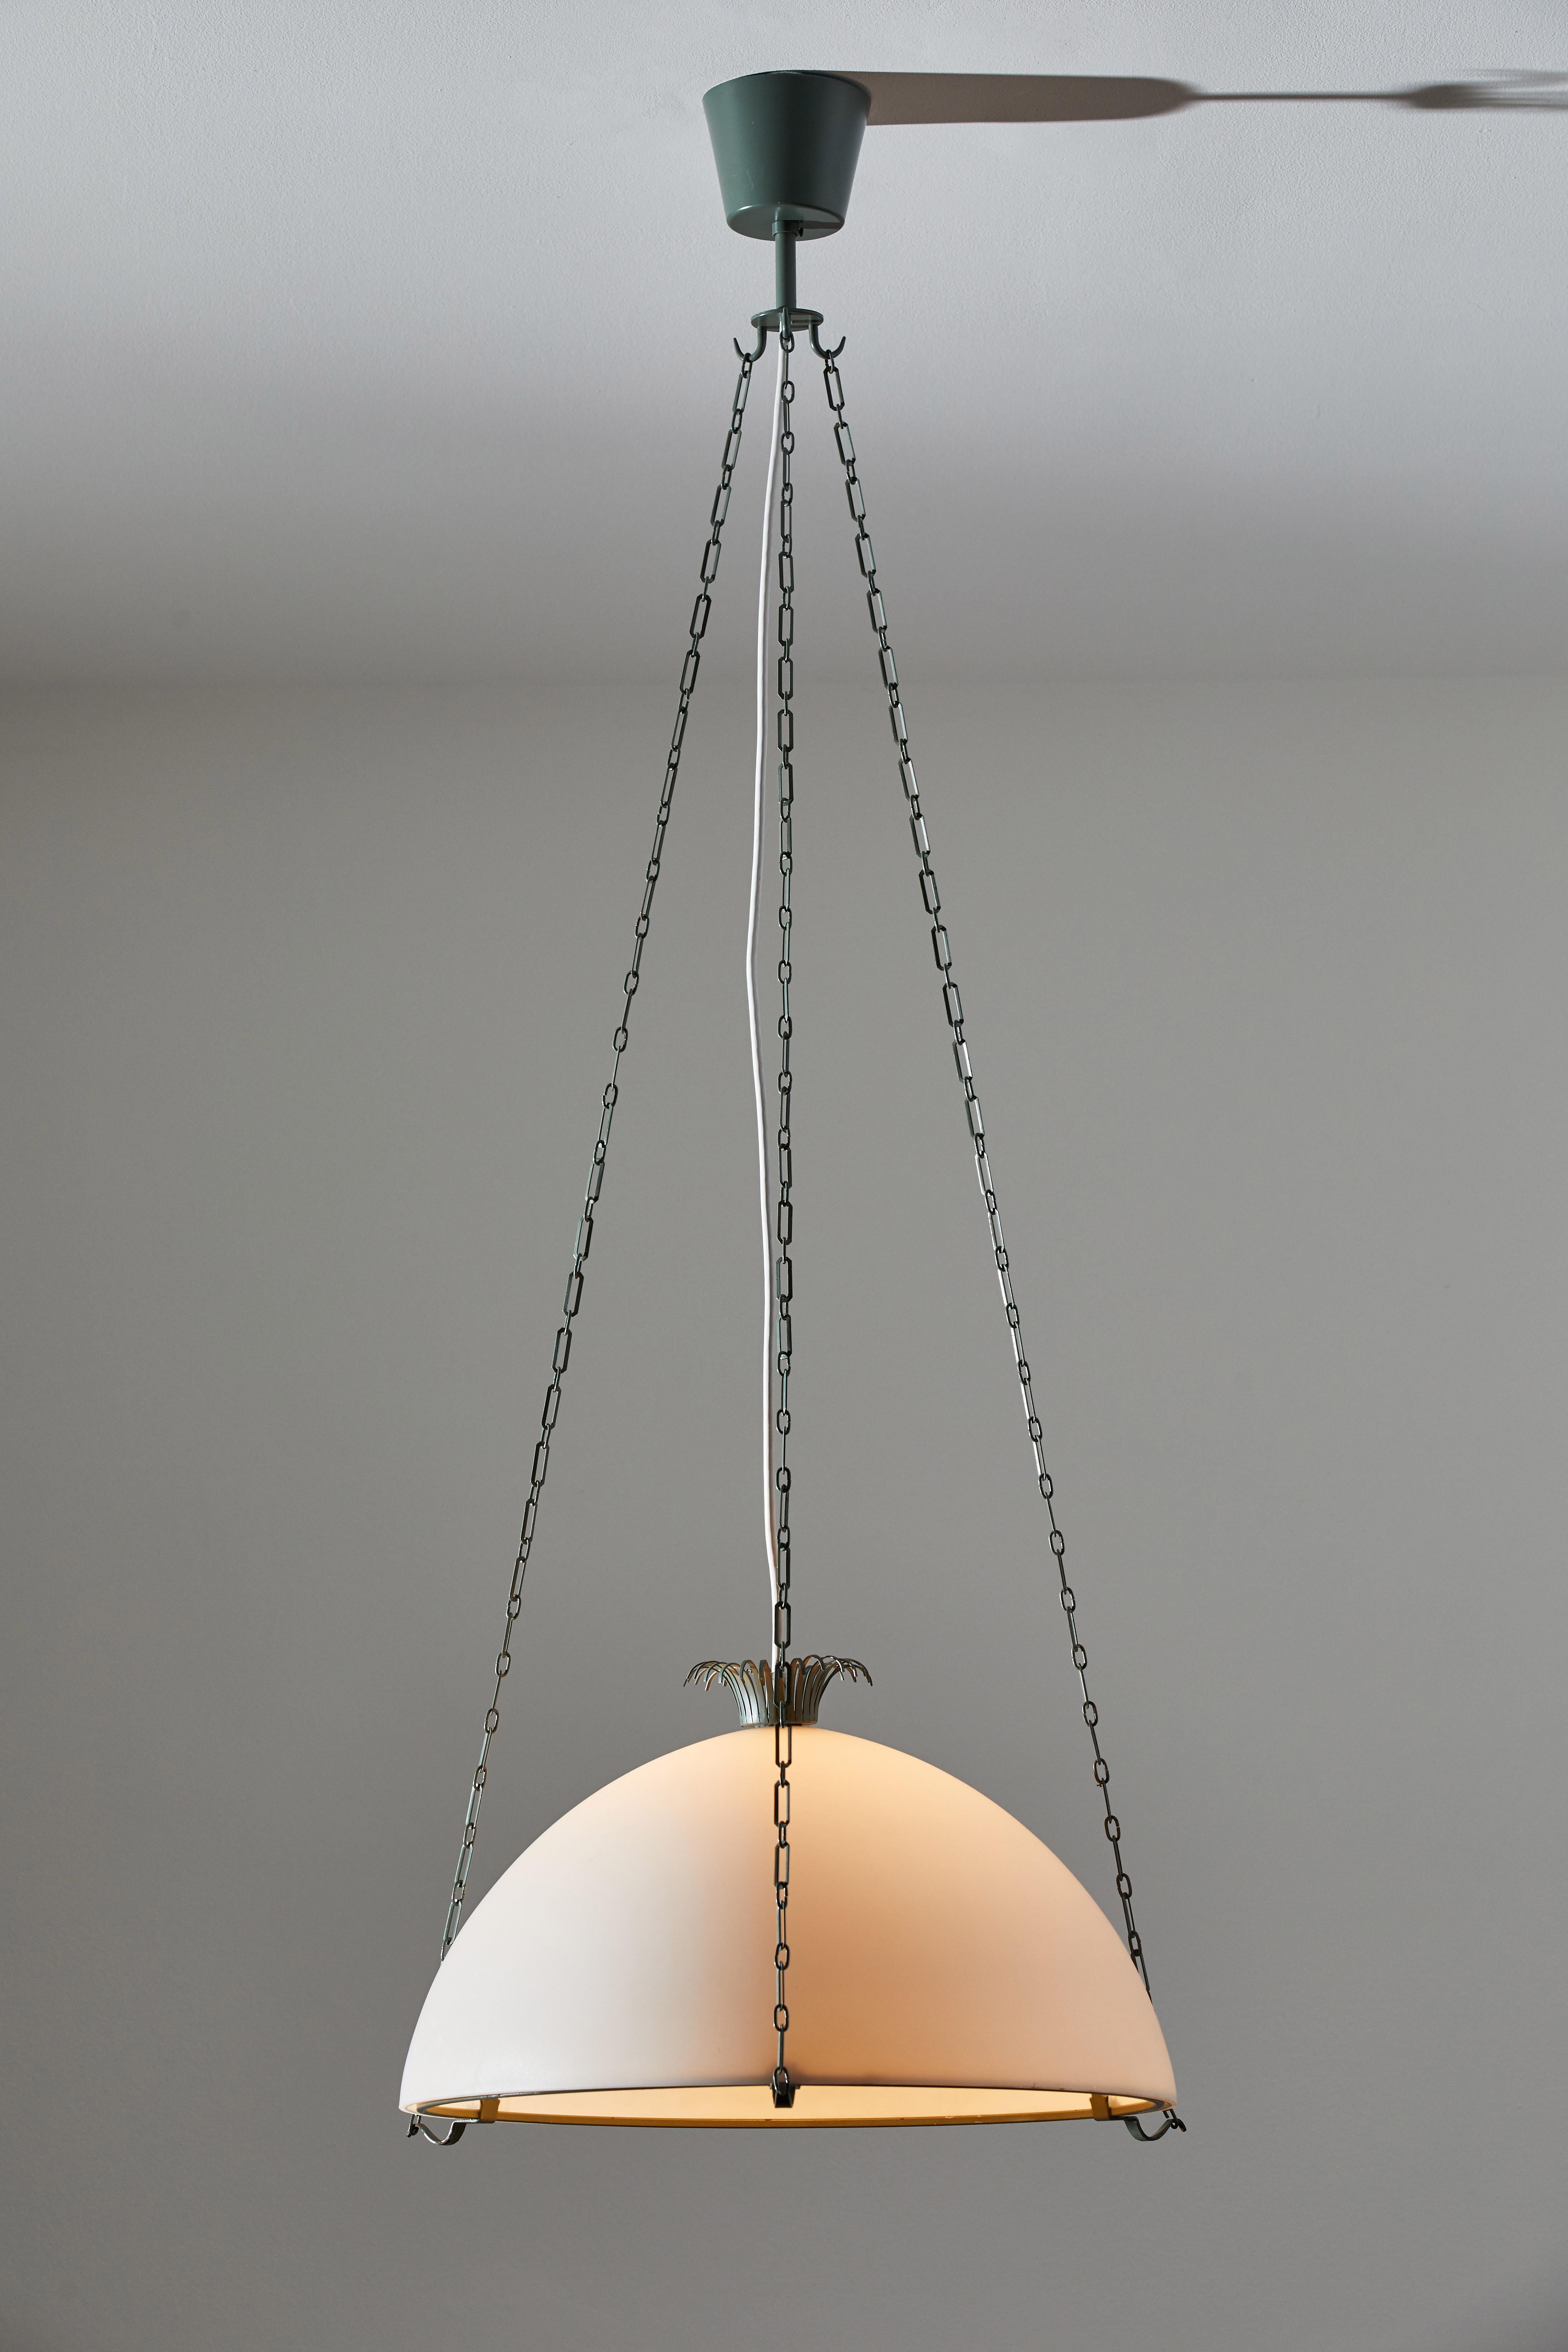 Rare parachute suspension light by Erik Gunnar Asplund. Designed and manufactured in Sweden, circa mid-1920s mid-1930s. Enameled metal armature and chain, brushed satin glass diffuser. Rewired for U.S. junction boxes. Takes one E27 100w maximum